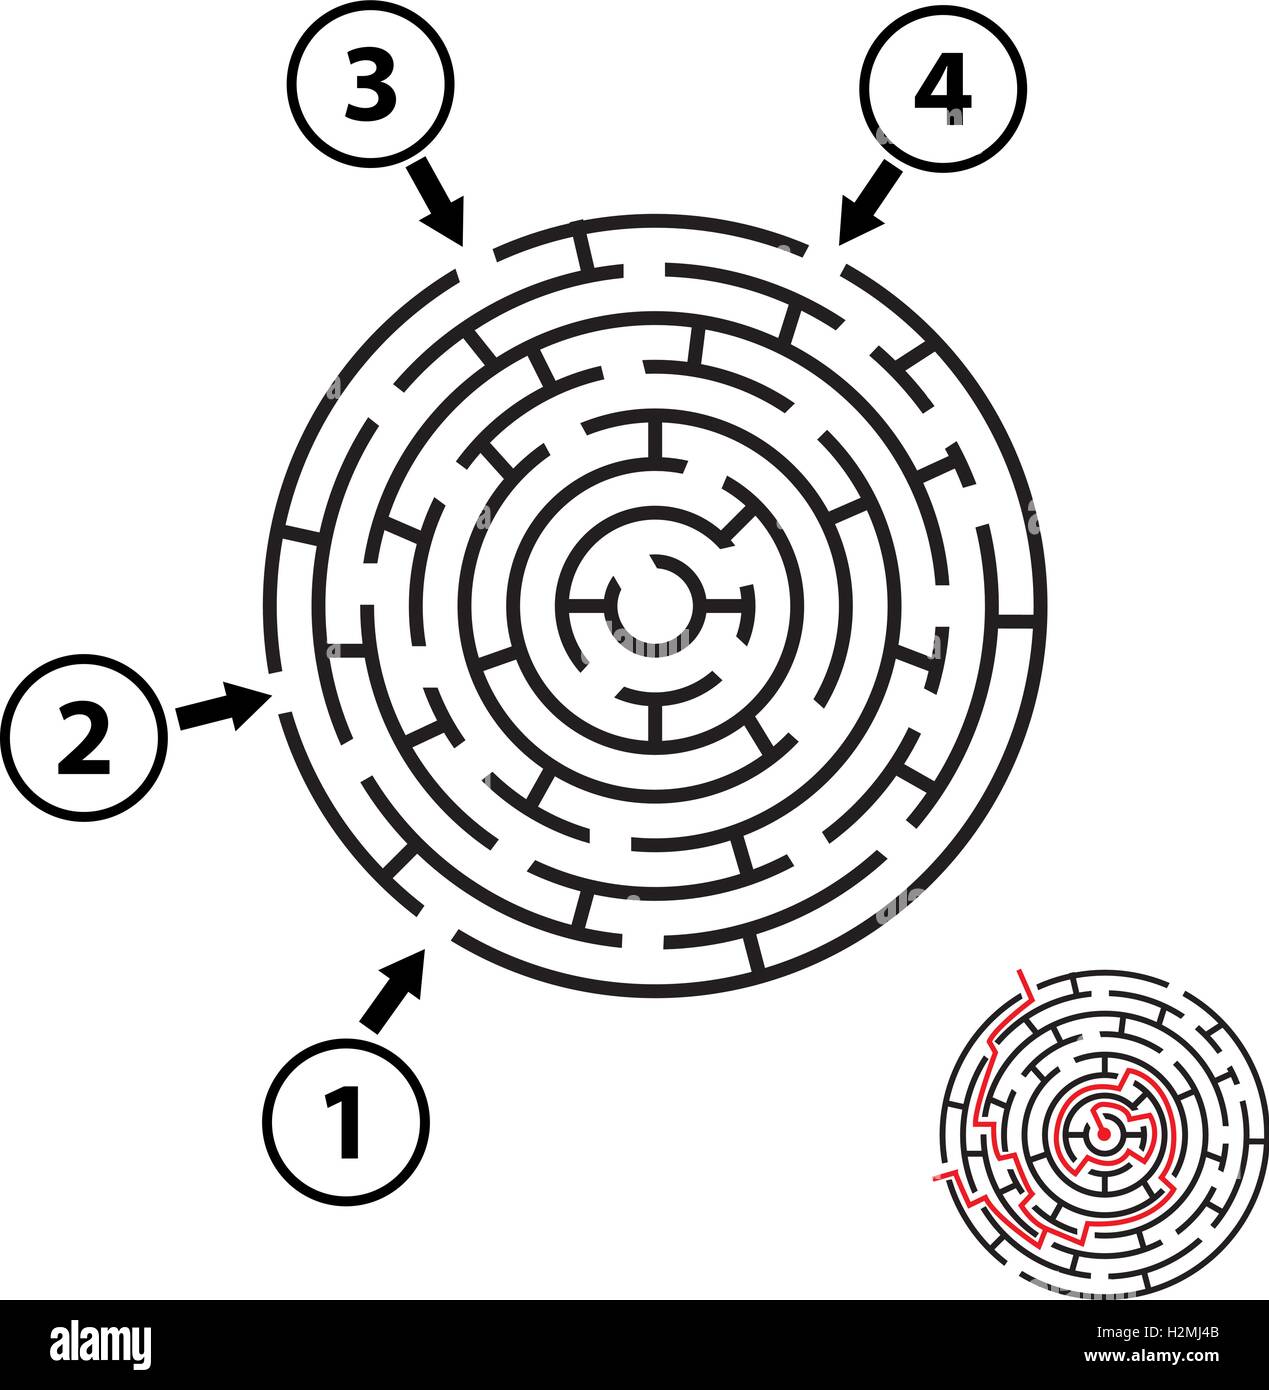 Vector round maze / labyrinth. Isolated on white Stock Vector